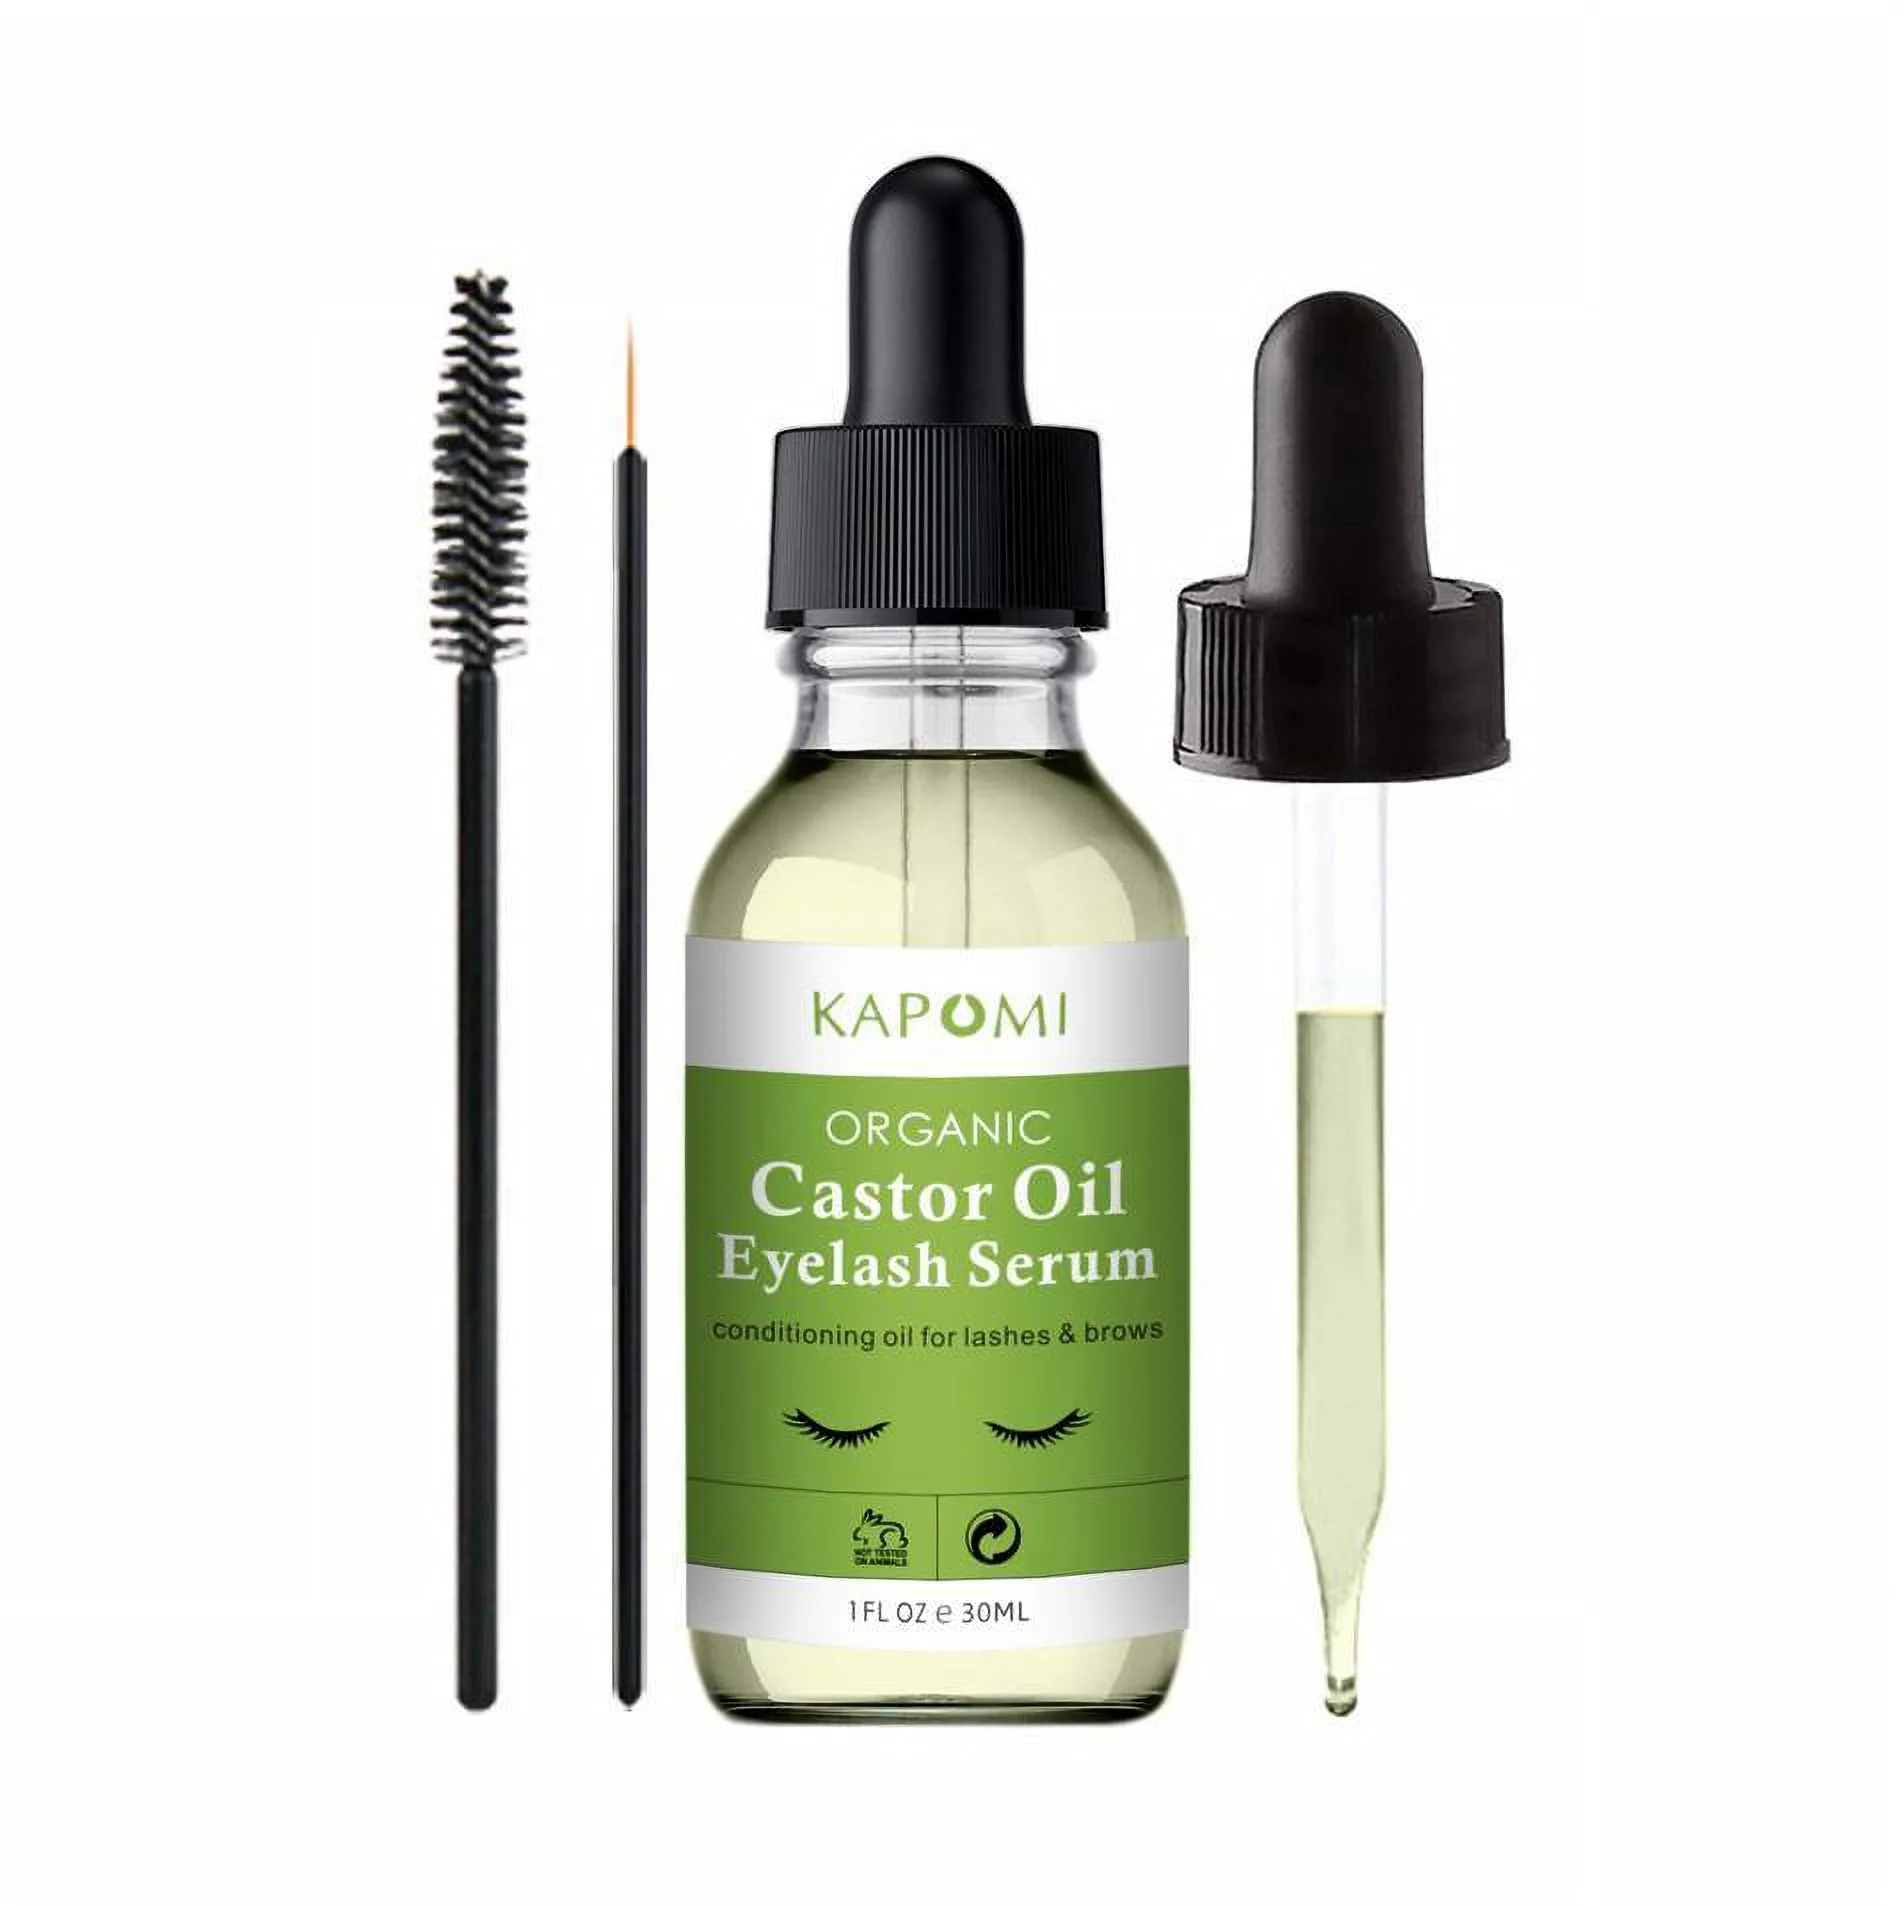 

Organic Castor Oil Eyelash Growth Serum Natural Plant Essence LengthenConditioning Oil for Lashes Brows with Mascara Brushes